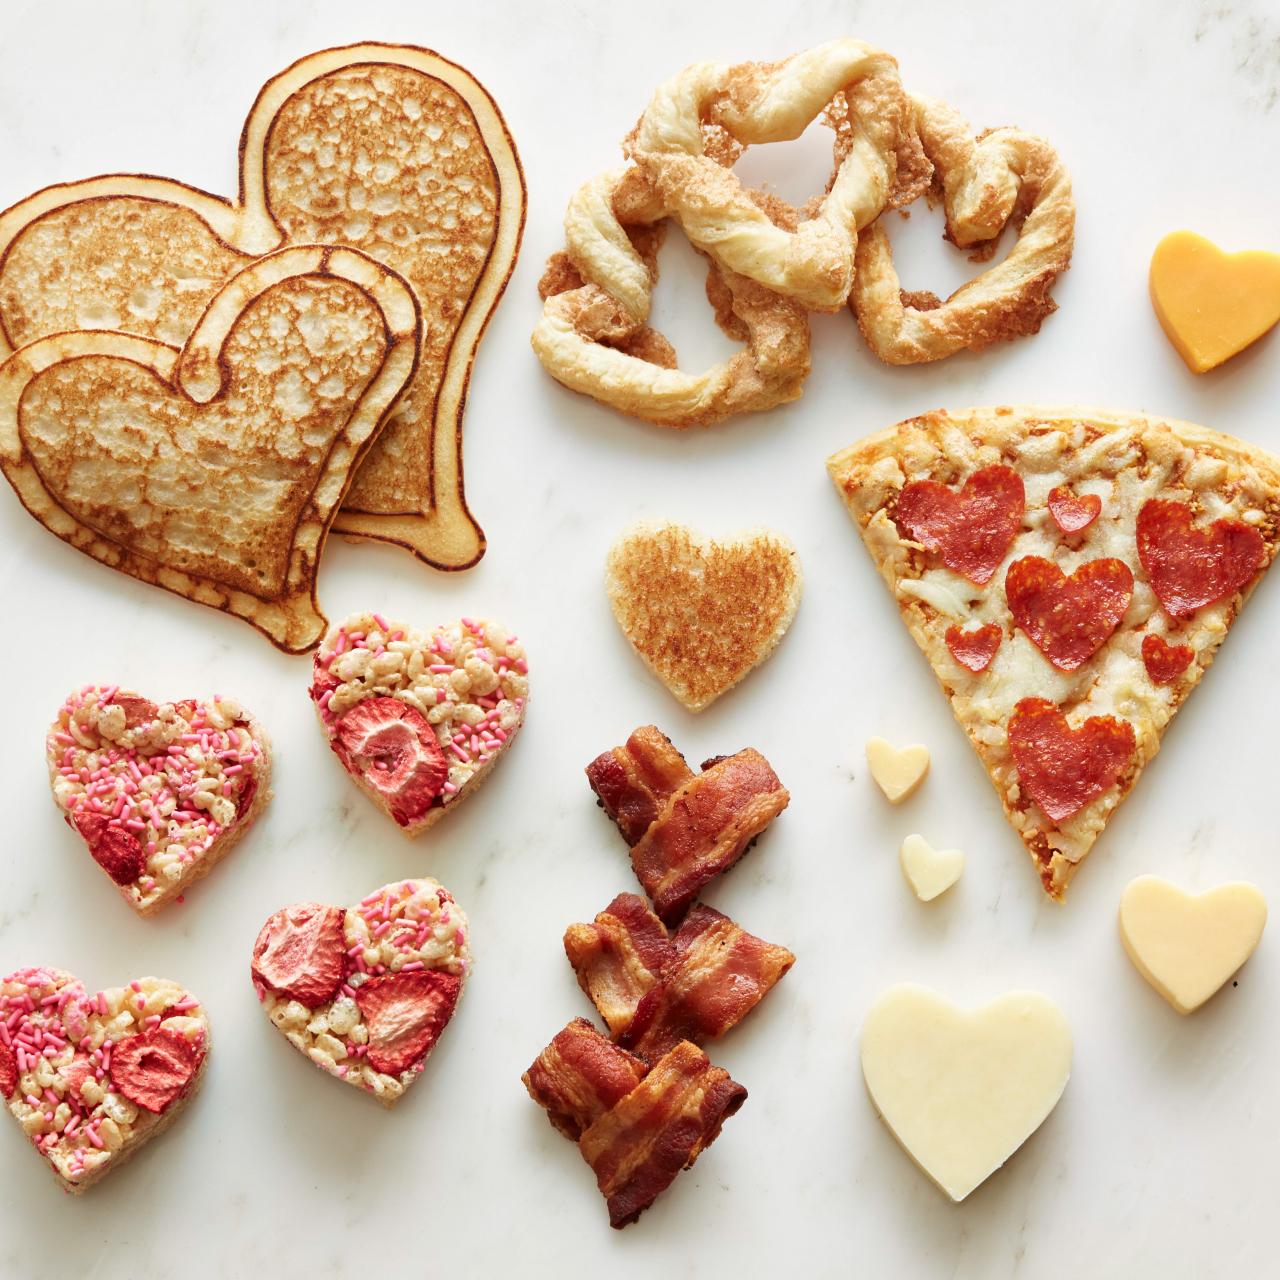 24 Heart-Shaped Foods for Valentine's Day, Valentine's Day Recipes and  Ideas